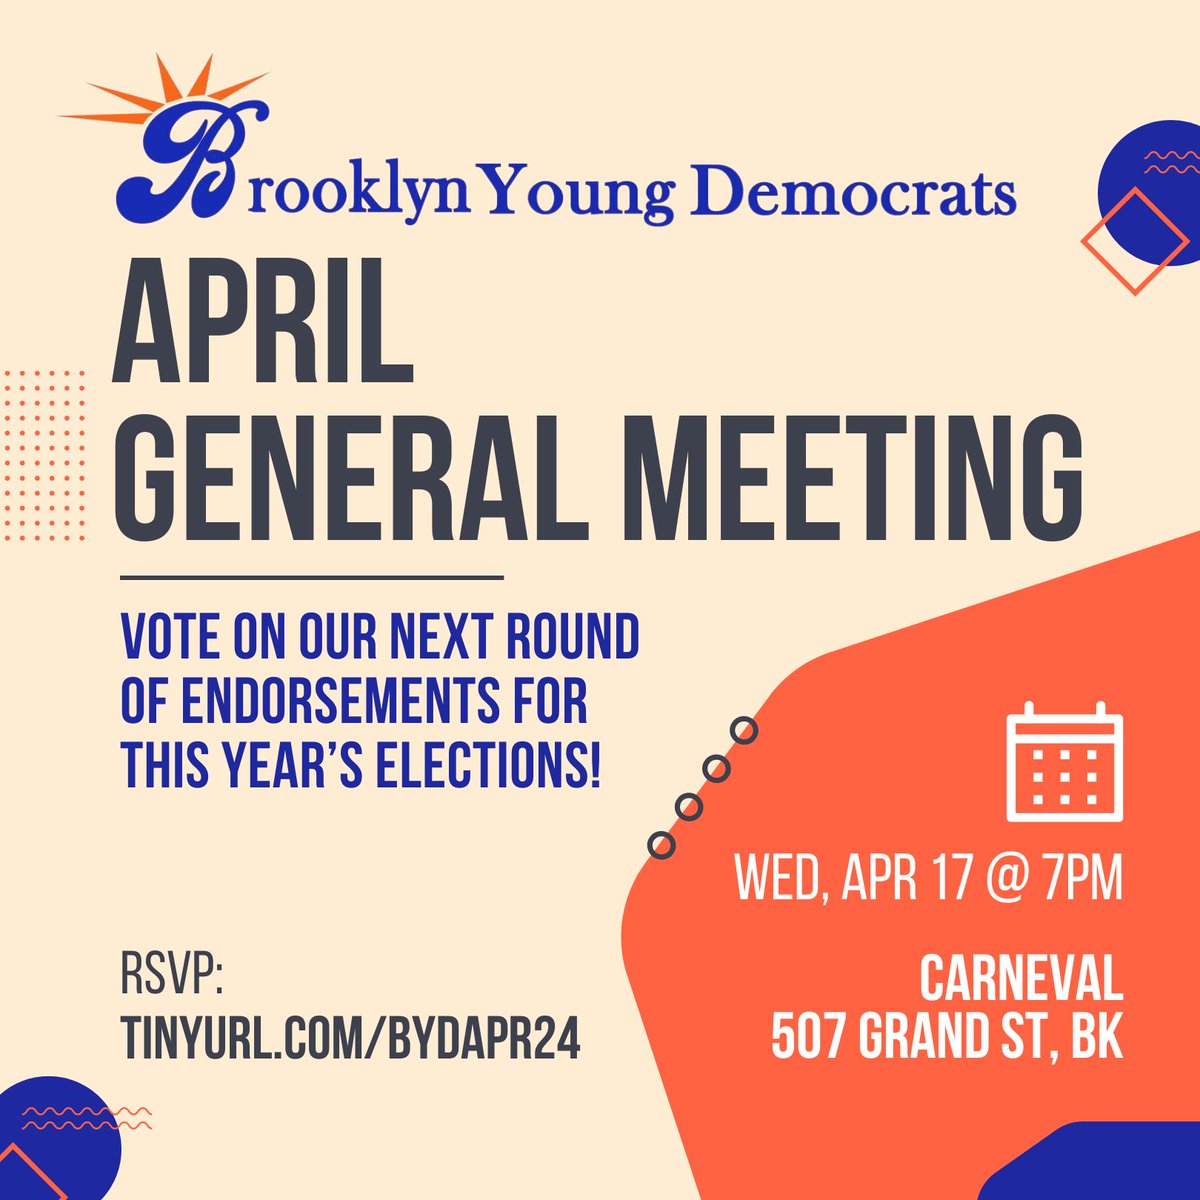 Join us in Williamsburg on Wednesday for our next general meeting! We'll be voting on our next round of endorsements in this year's crucial election season. Meet us at Carneval at 7pm to hear from candidates running to represent our communities! RSVP: tinyurl.com/BYDApr24